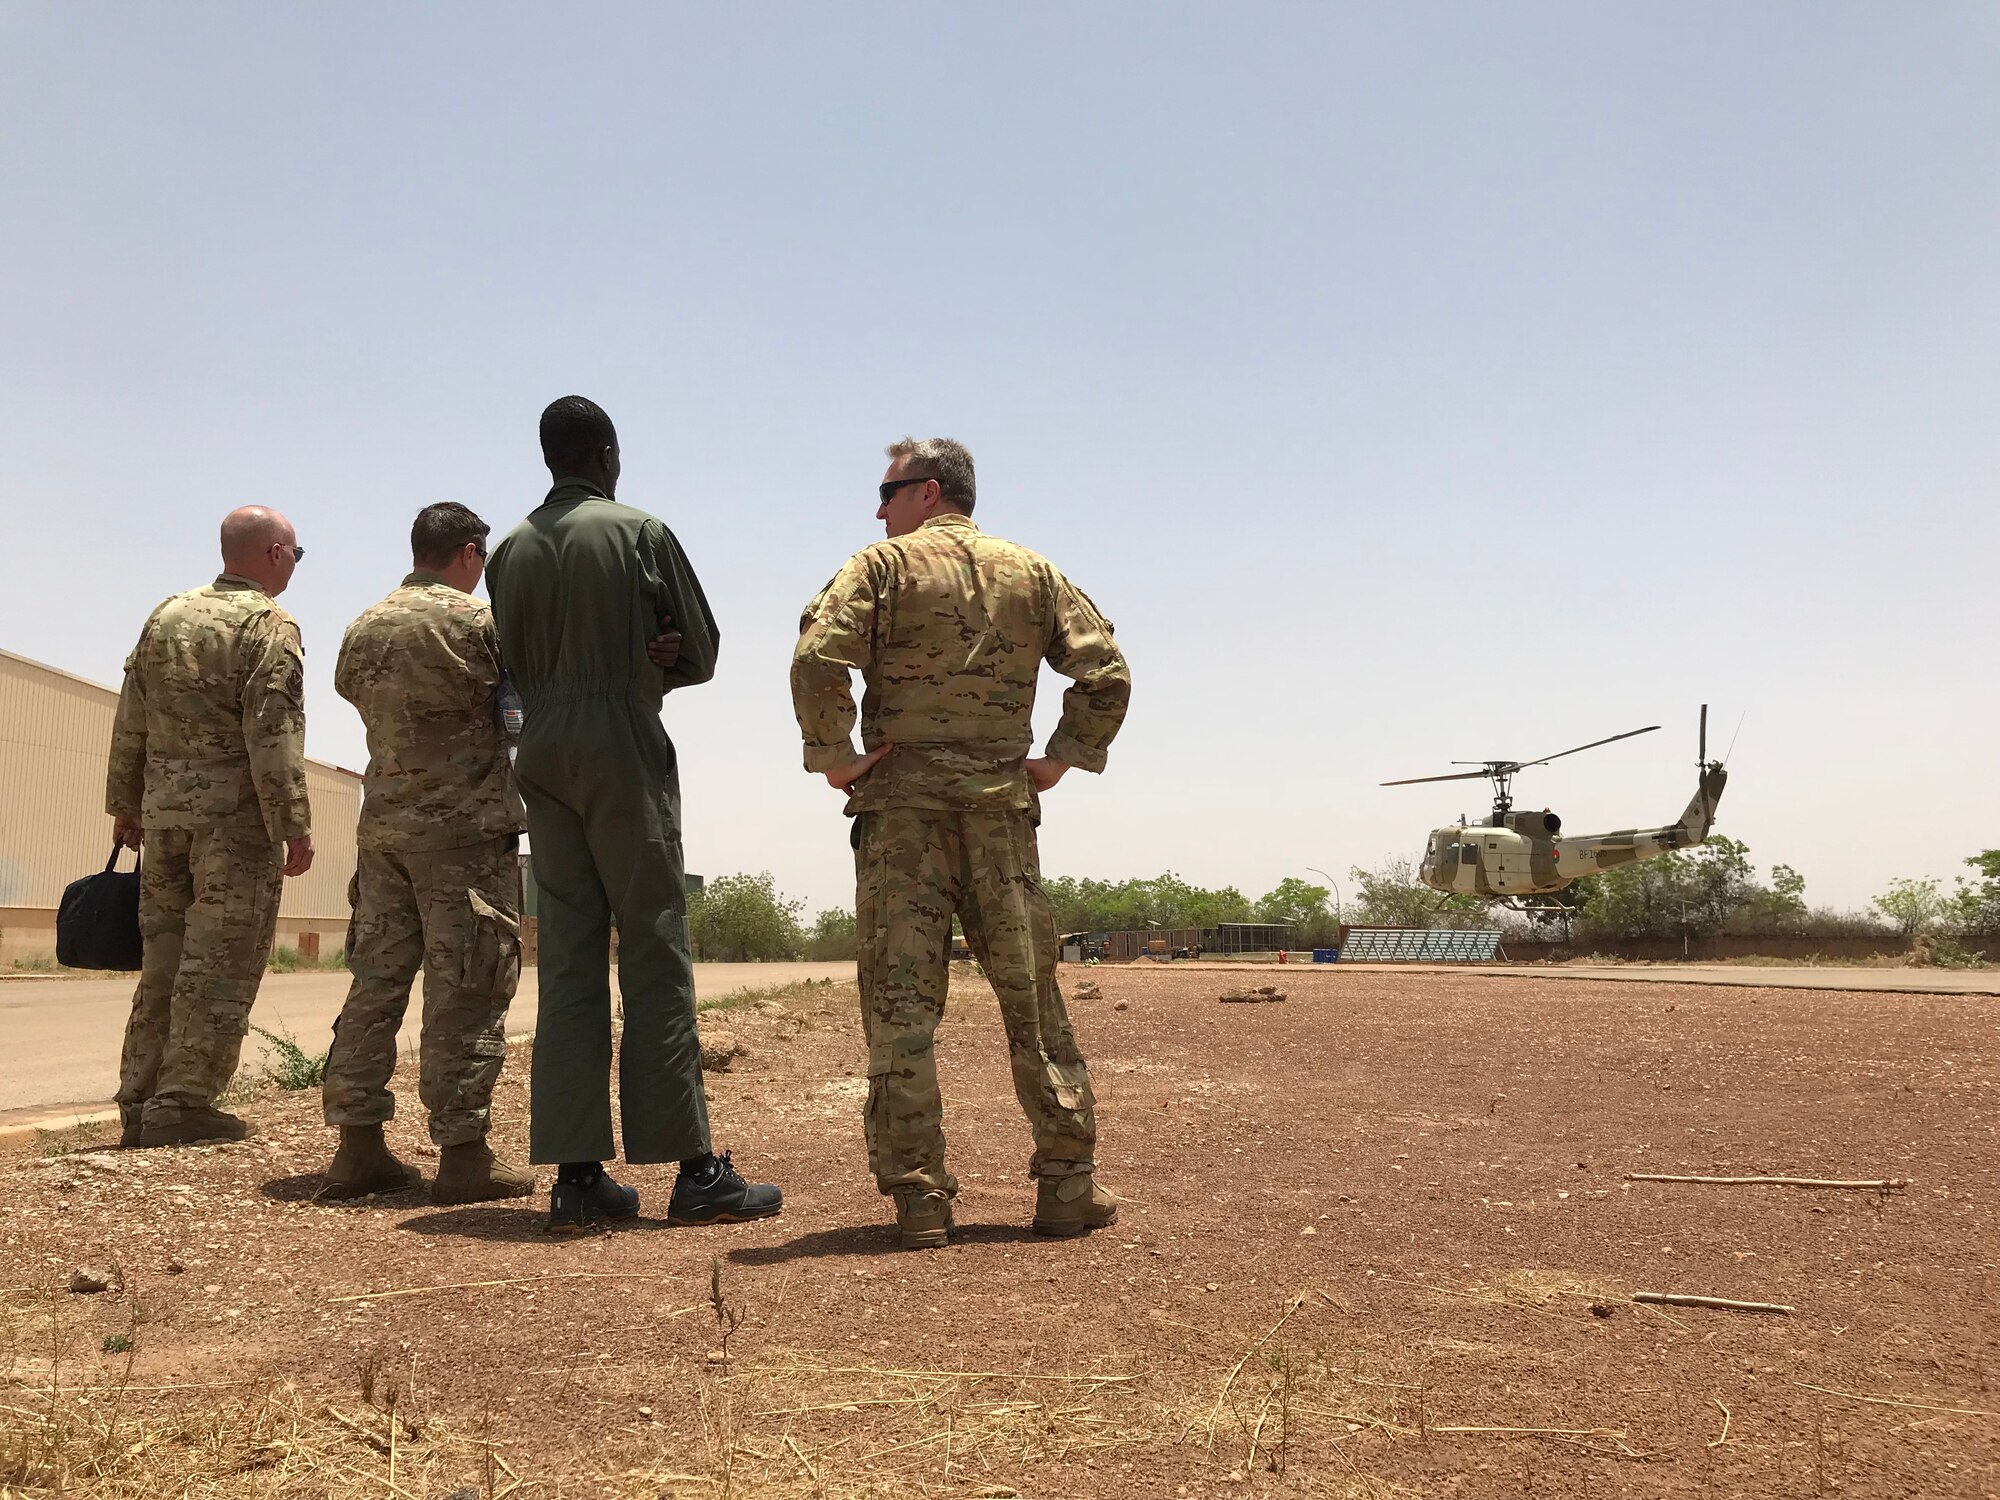 Air Advisors observe a hover check by the Burkina Faso Air Force at Airbase 511 in Burkina Faso, Africa, April 10, 2019. The 818 MSAS sent a seven member Rotary Wing Maintenance and Operations mobile training team to identify the cause of a significant maintenance issue that had grounded the Burkina Faso Air Force’s UH-1H helicopter fleet for nearly a year. (U.S. Air Force photo by Master Sgt. Sarah Colwell)